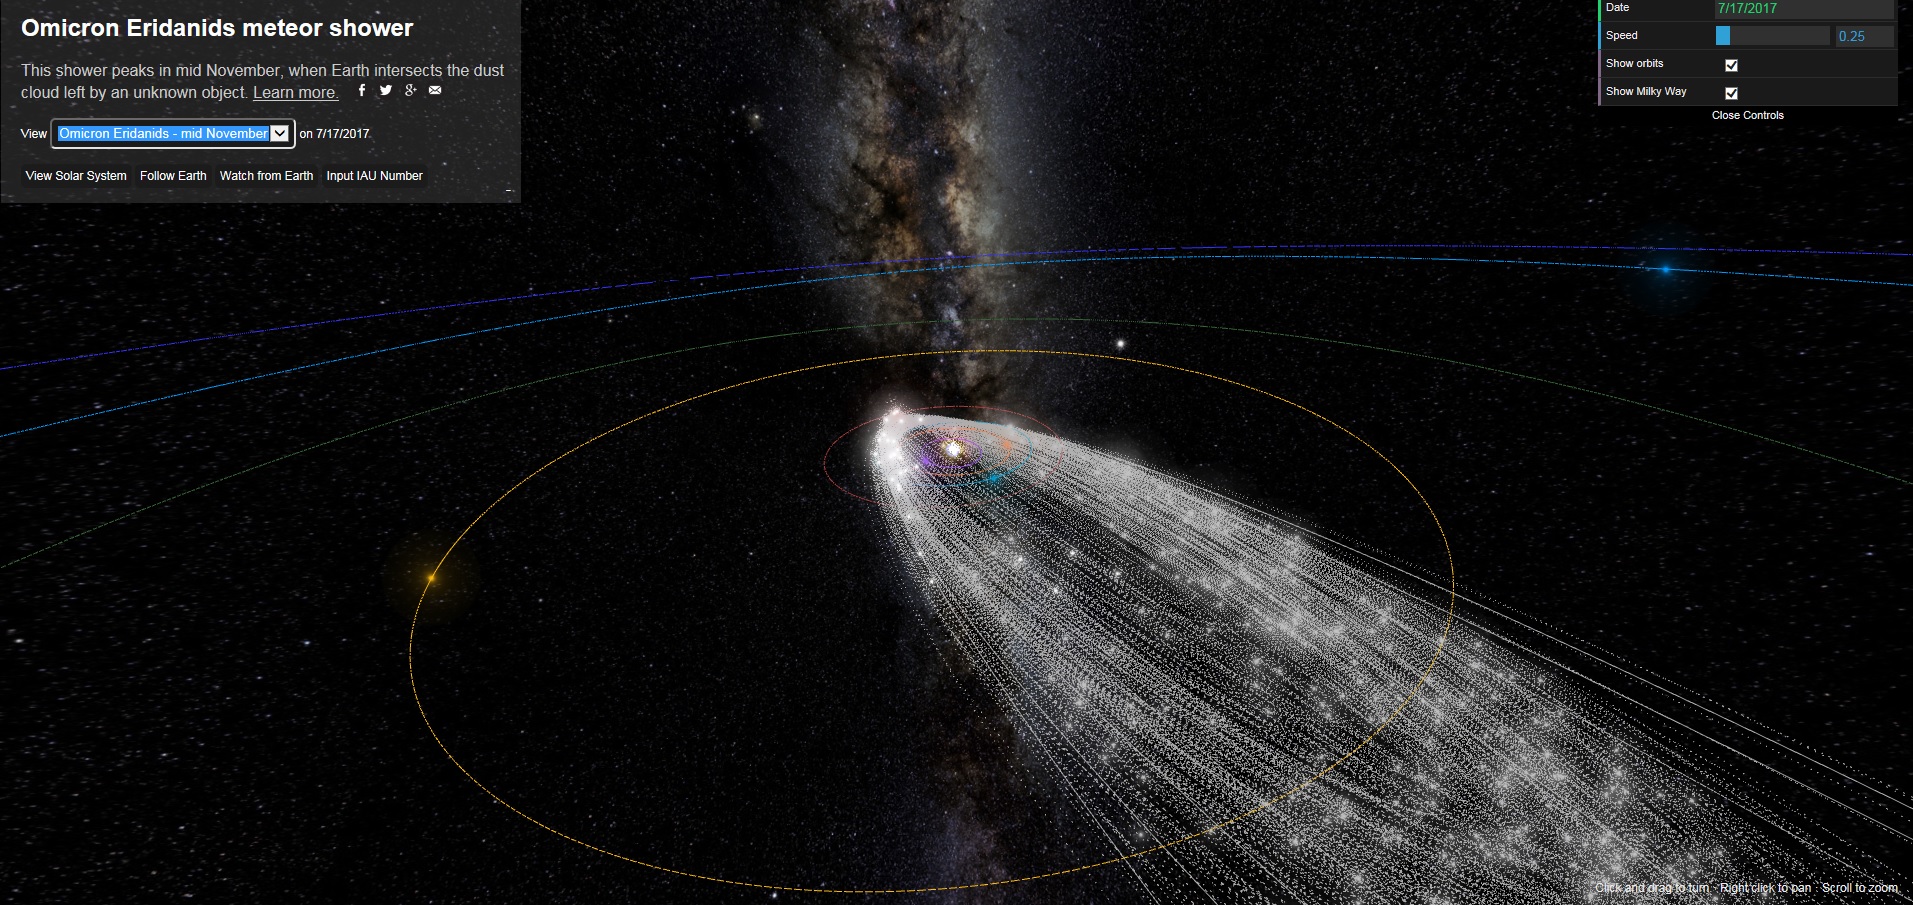 Warped meteor showers hit Earth at all angles